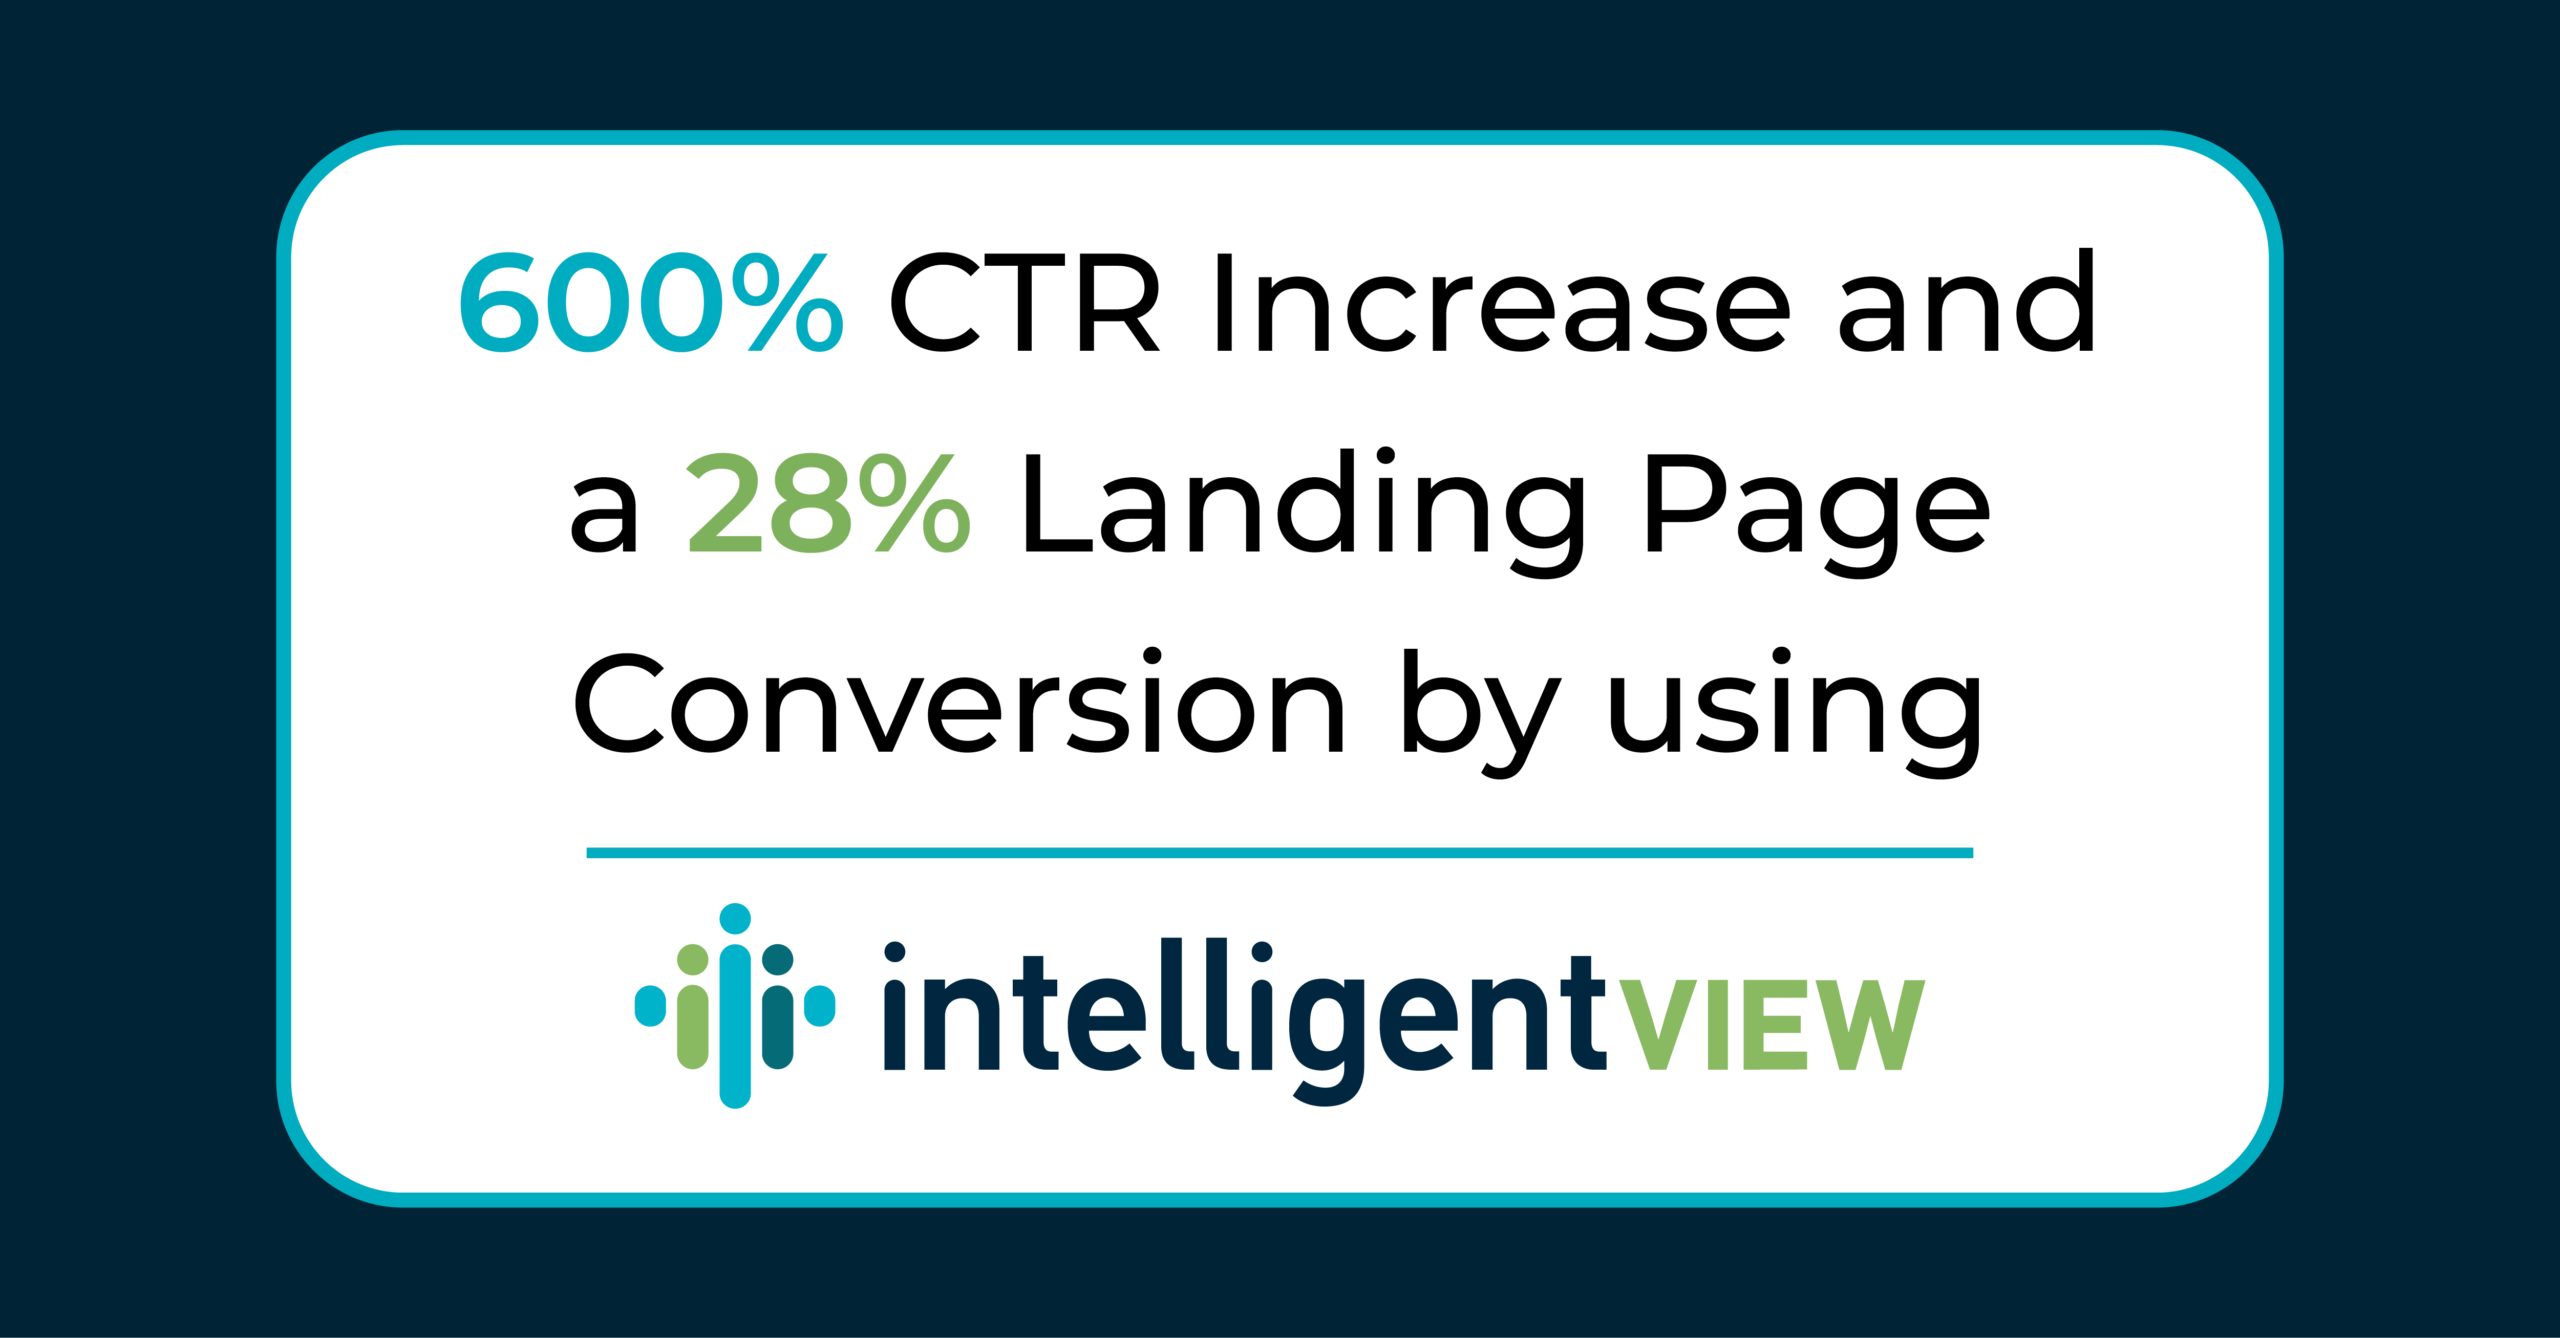 A thumbnail highlighting how a company uses the intelligentVIEW audience insights platform to deliver more effective campaigns with a 600% CTR increase and 28% landing page conversion.